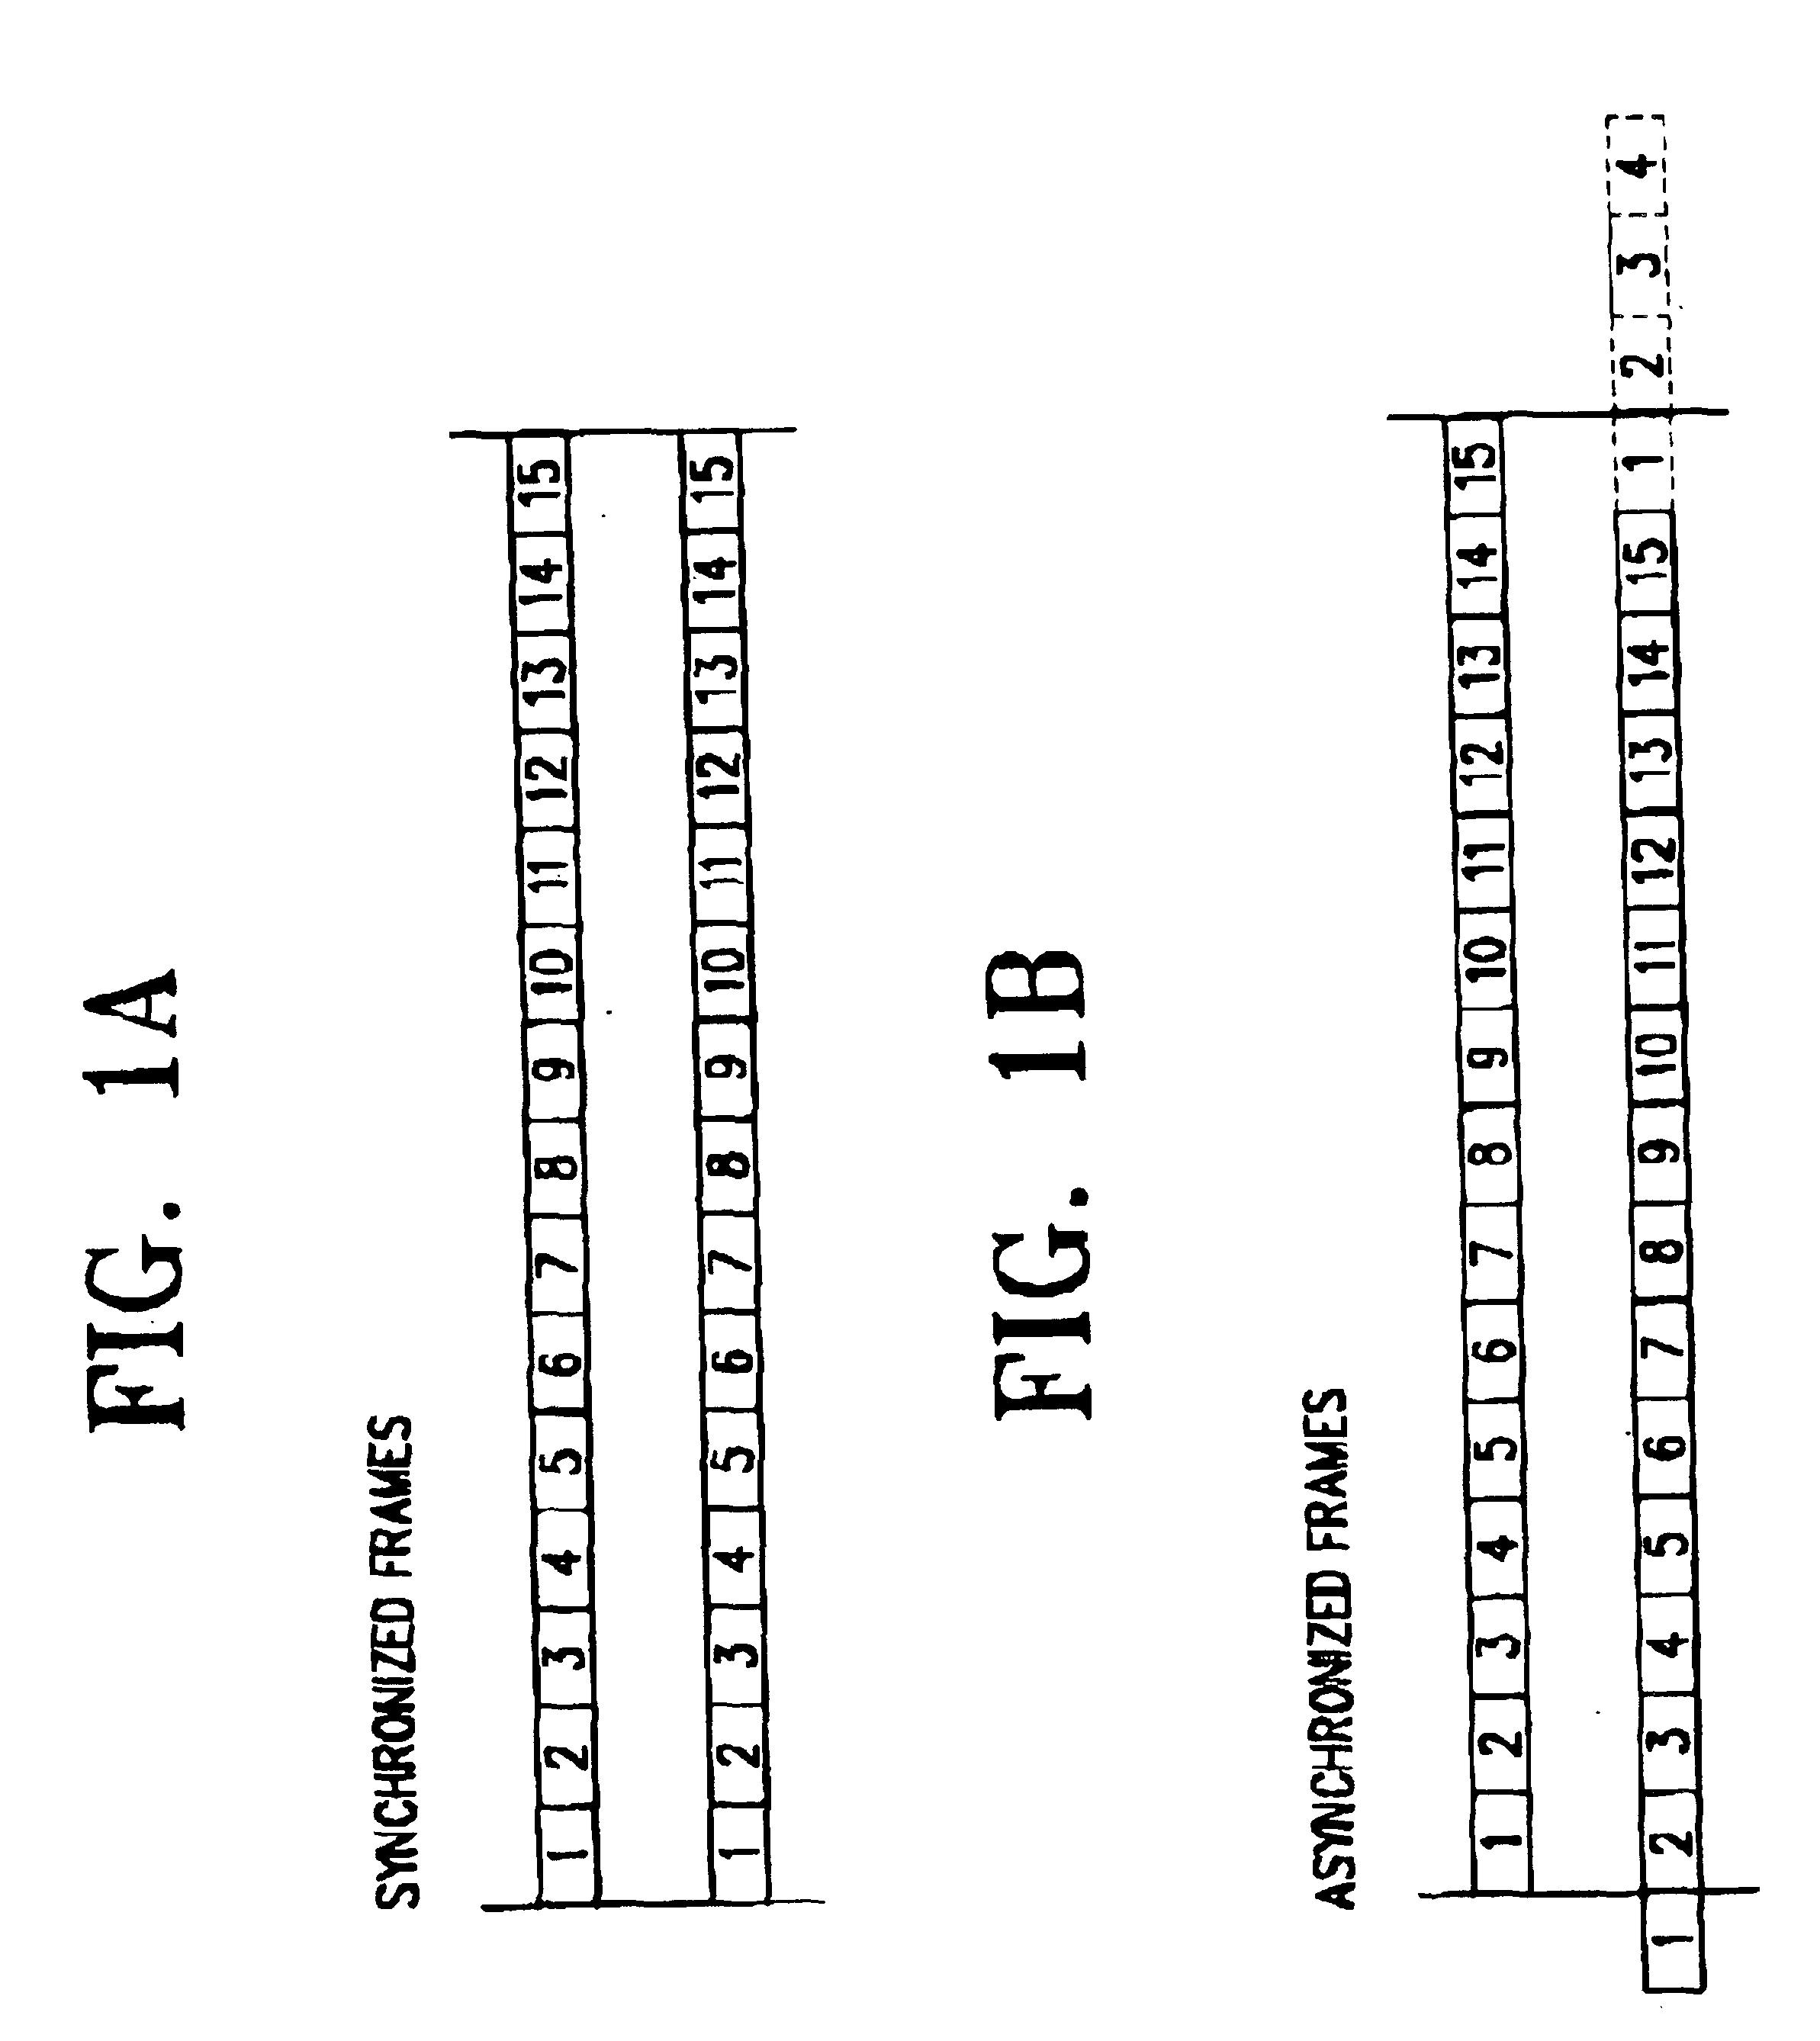 Apparatus and method for generating frame sync word and verifying the frame sync word in W-CDMA communication system